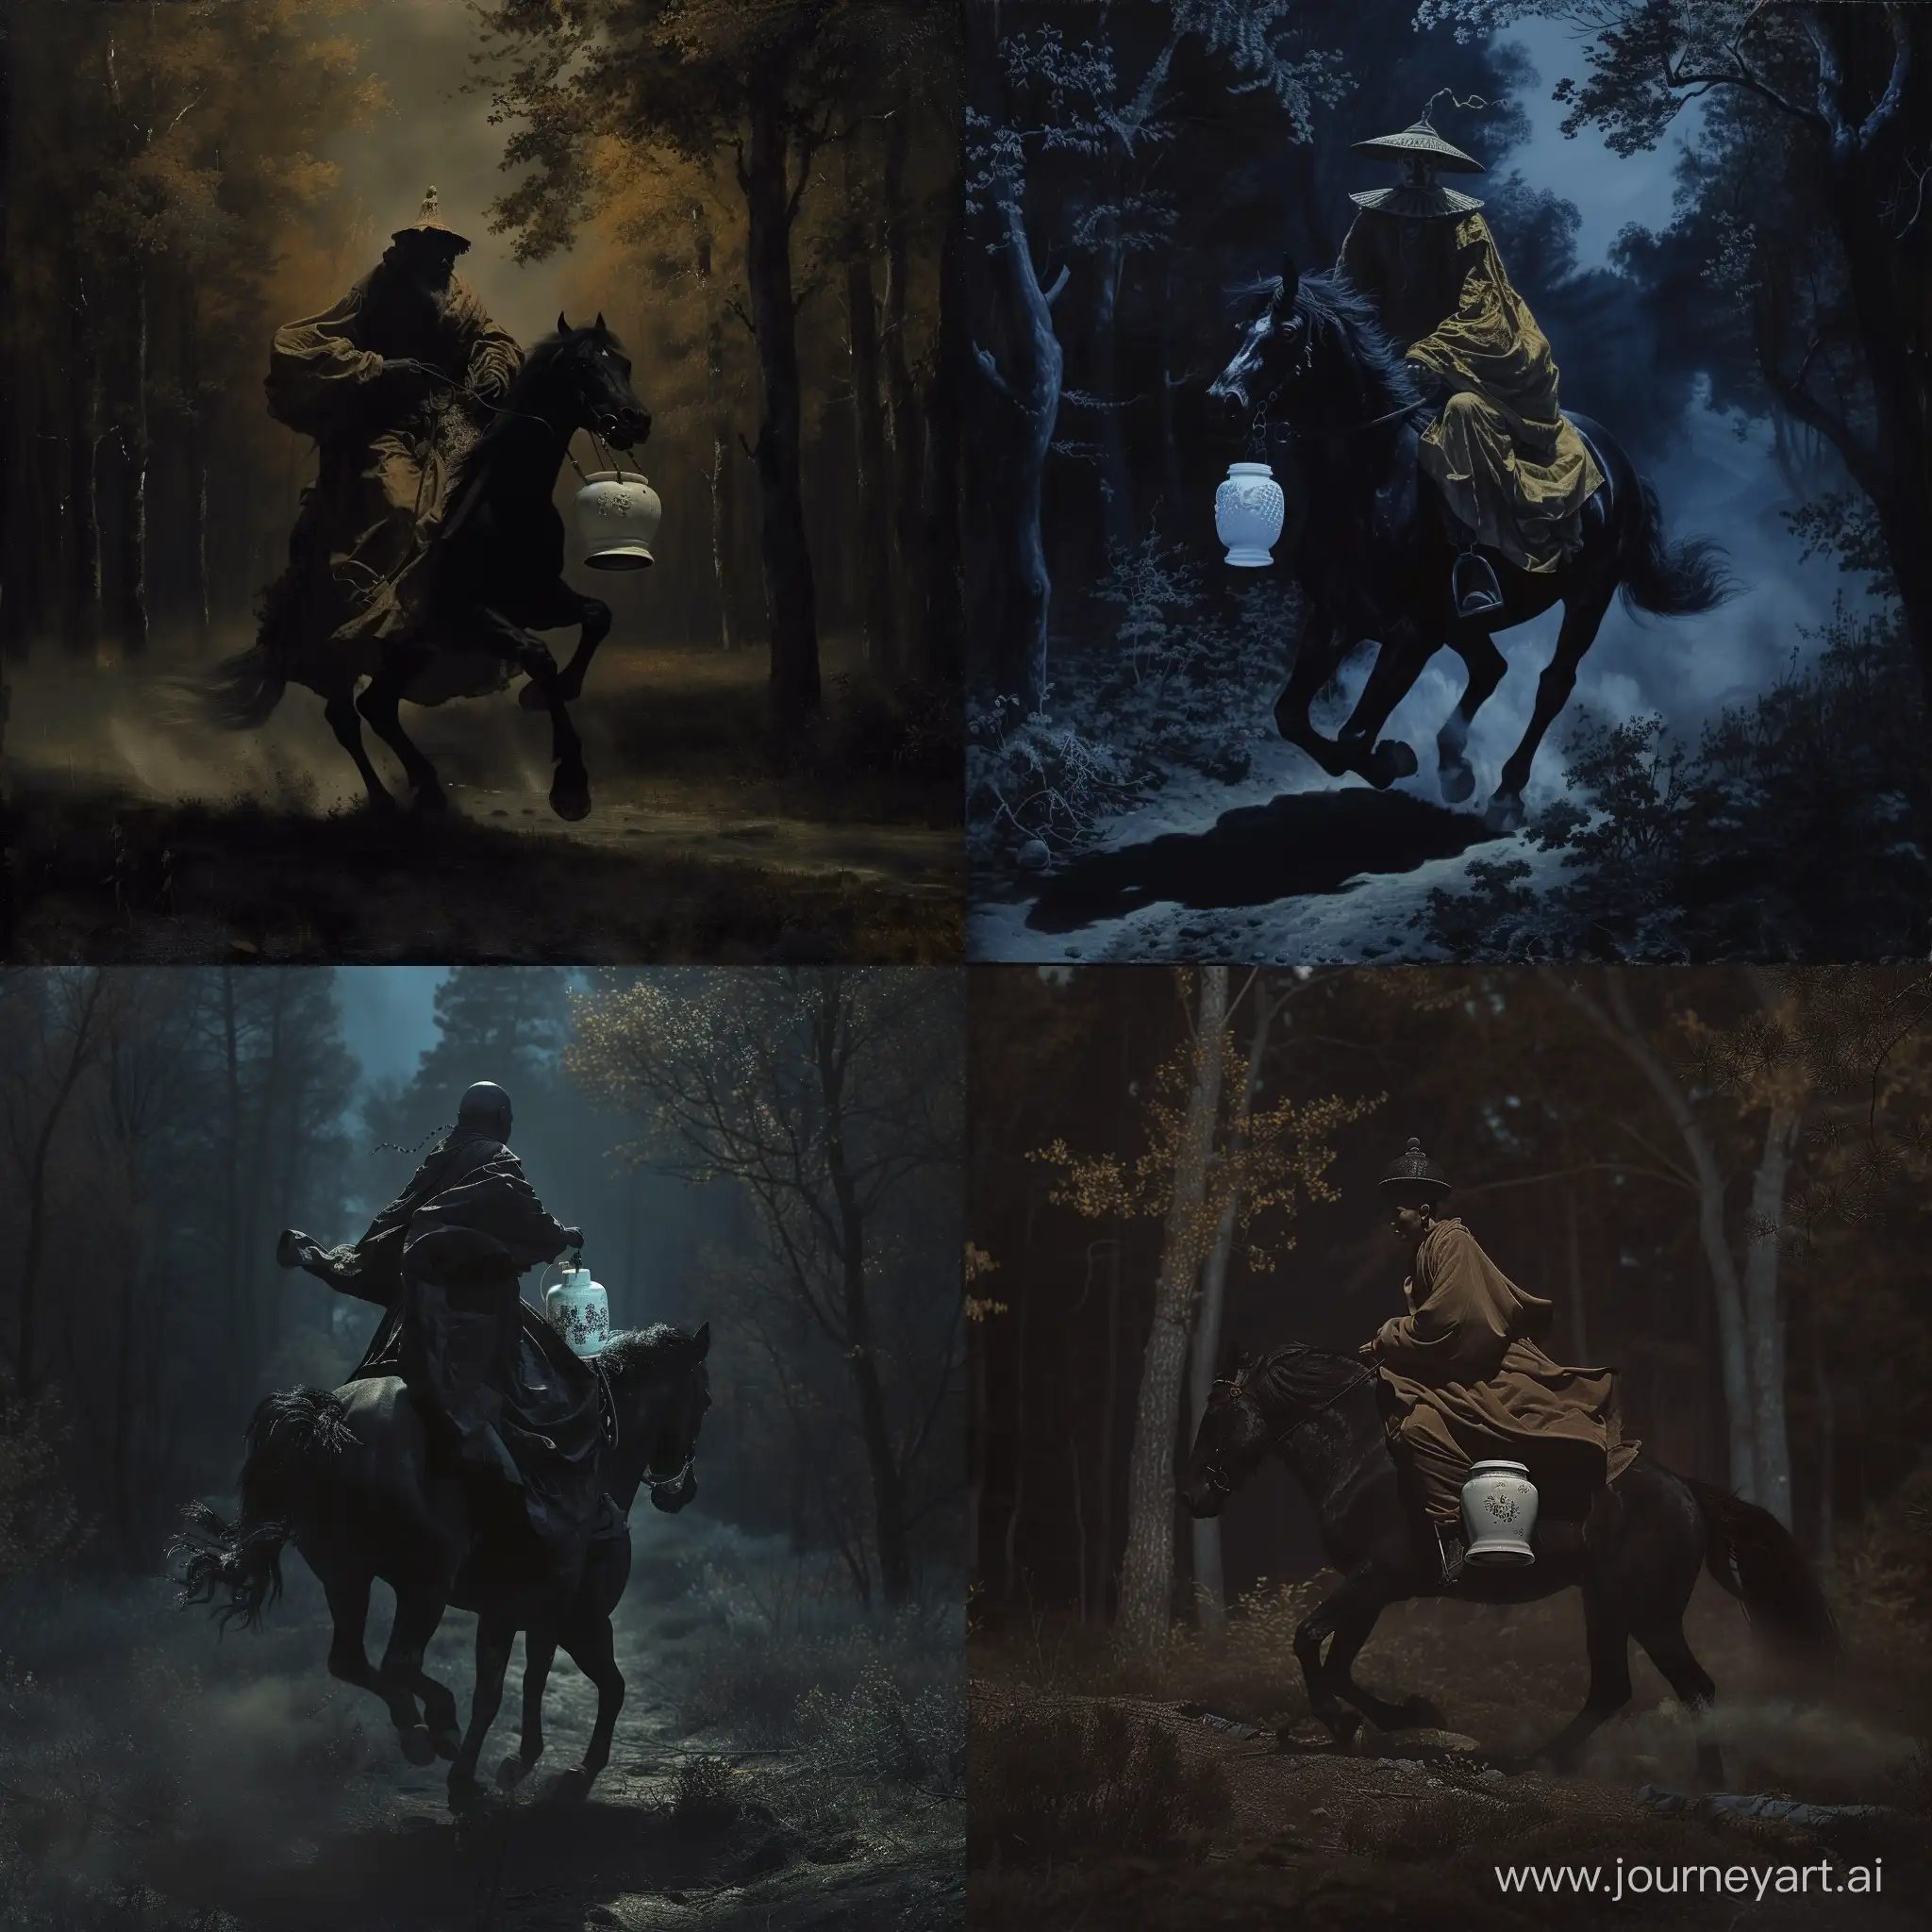 Mysterious-Monk-Riding-Through-Dark-Forest-with-White-Chinese-Jar-at-Night